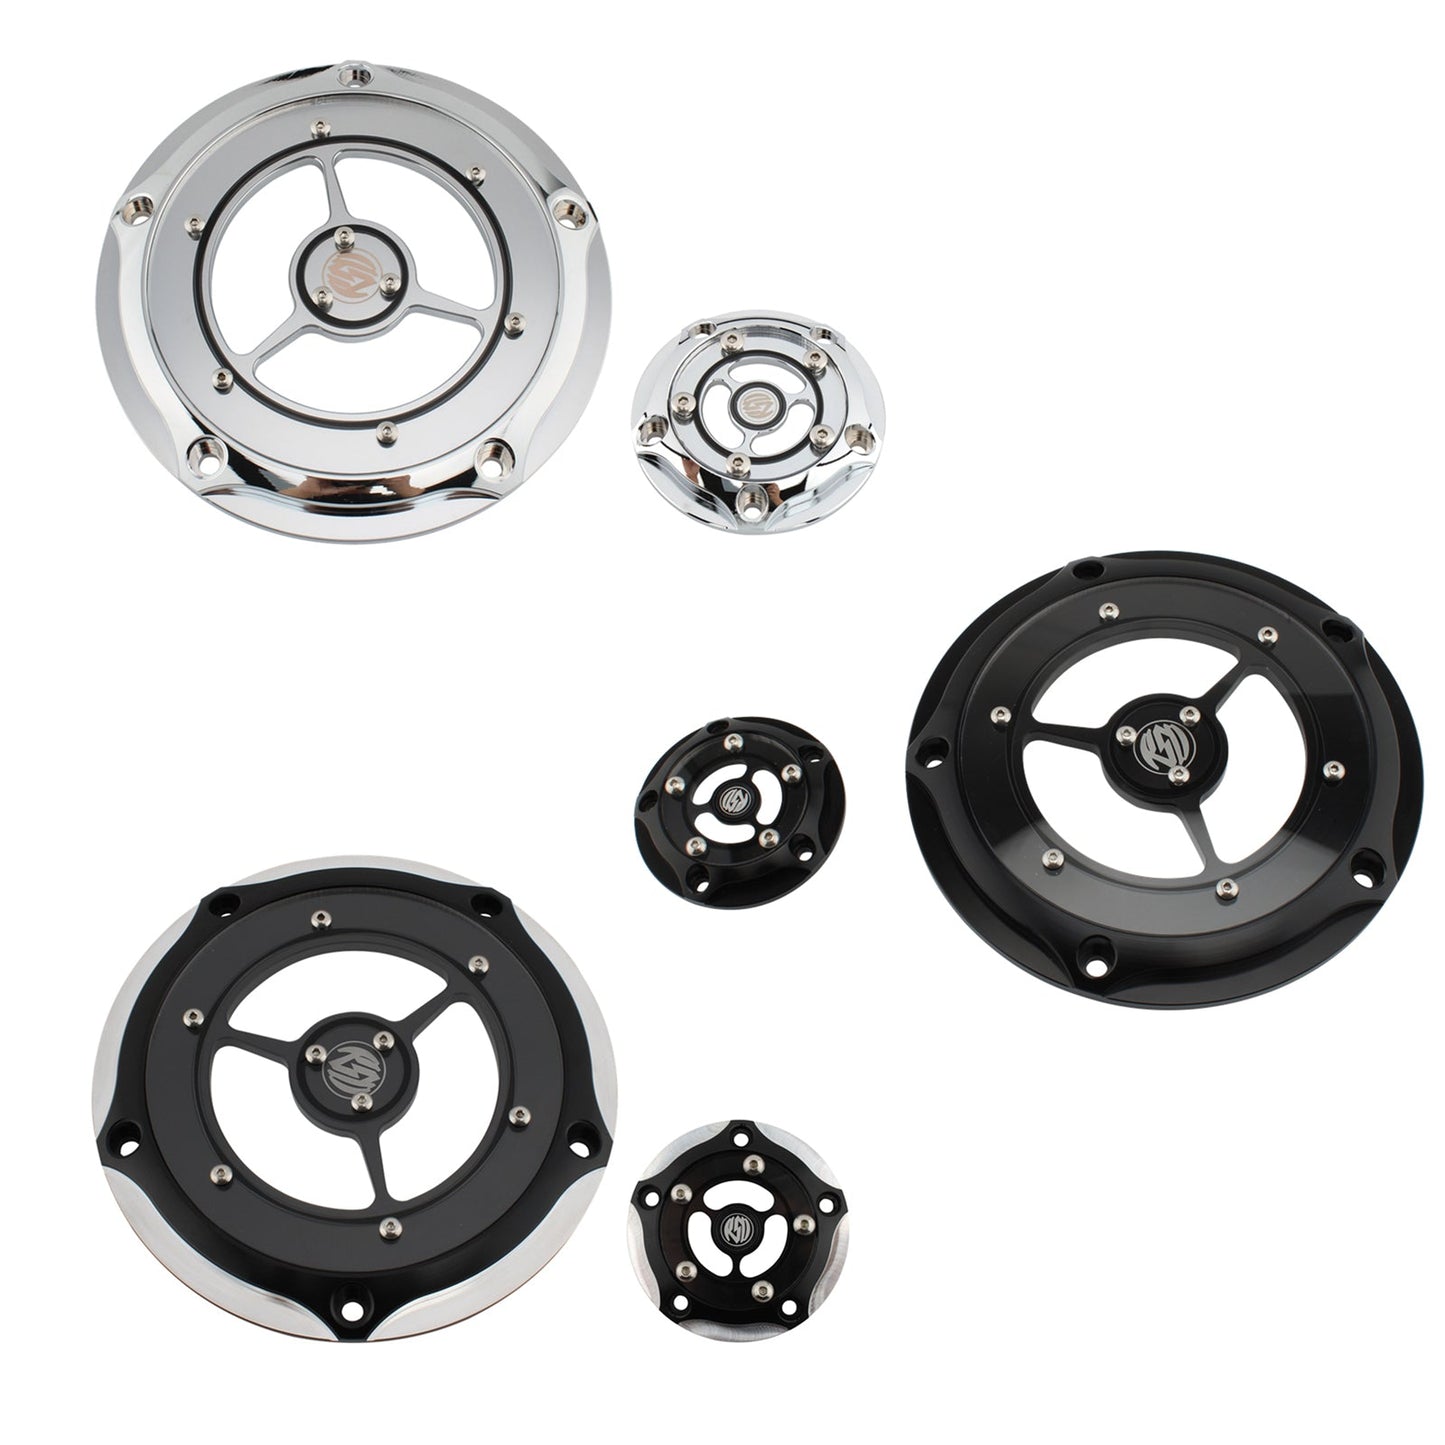 Engine Protector Crank Case Stator Cover Black Fit For Road King Fat Glide 1584